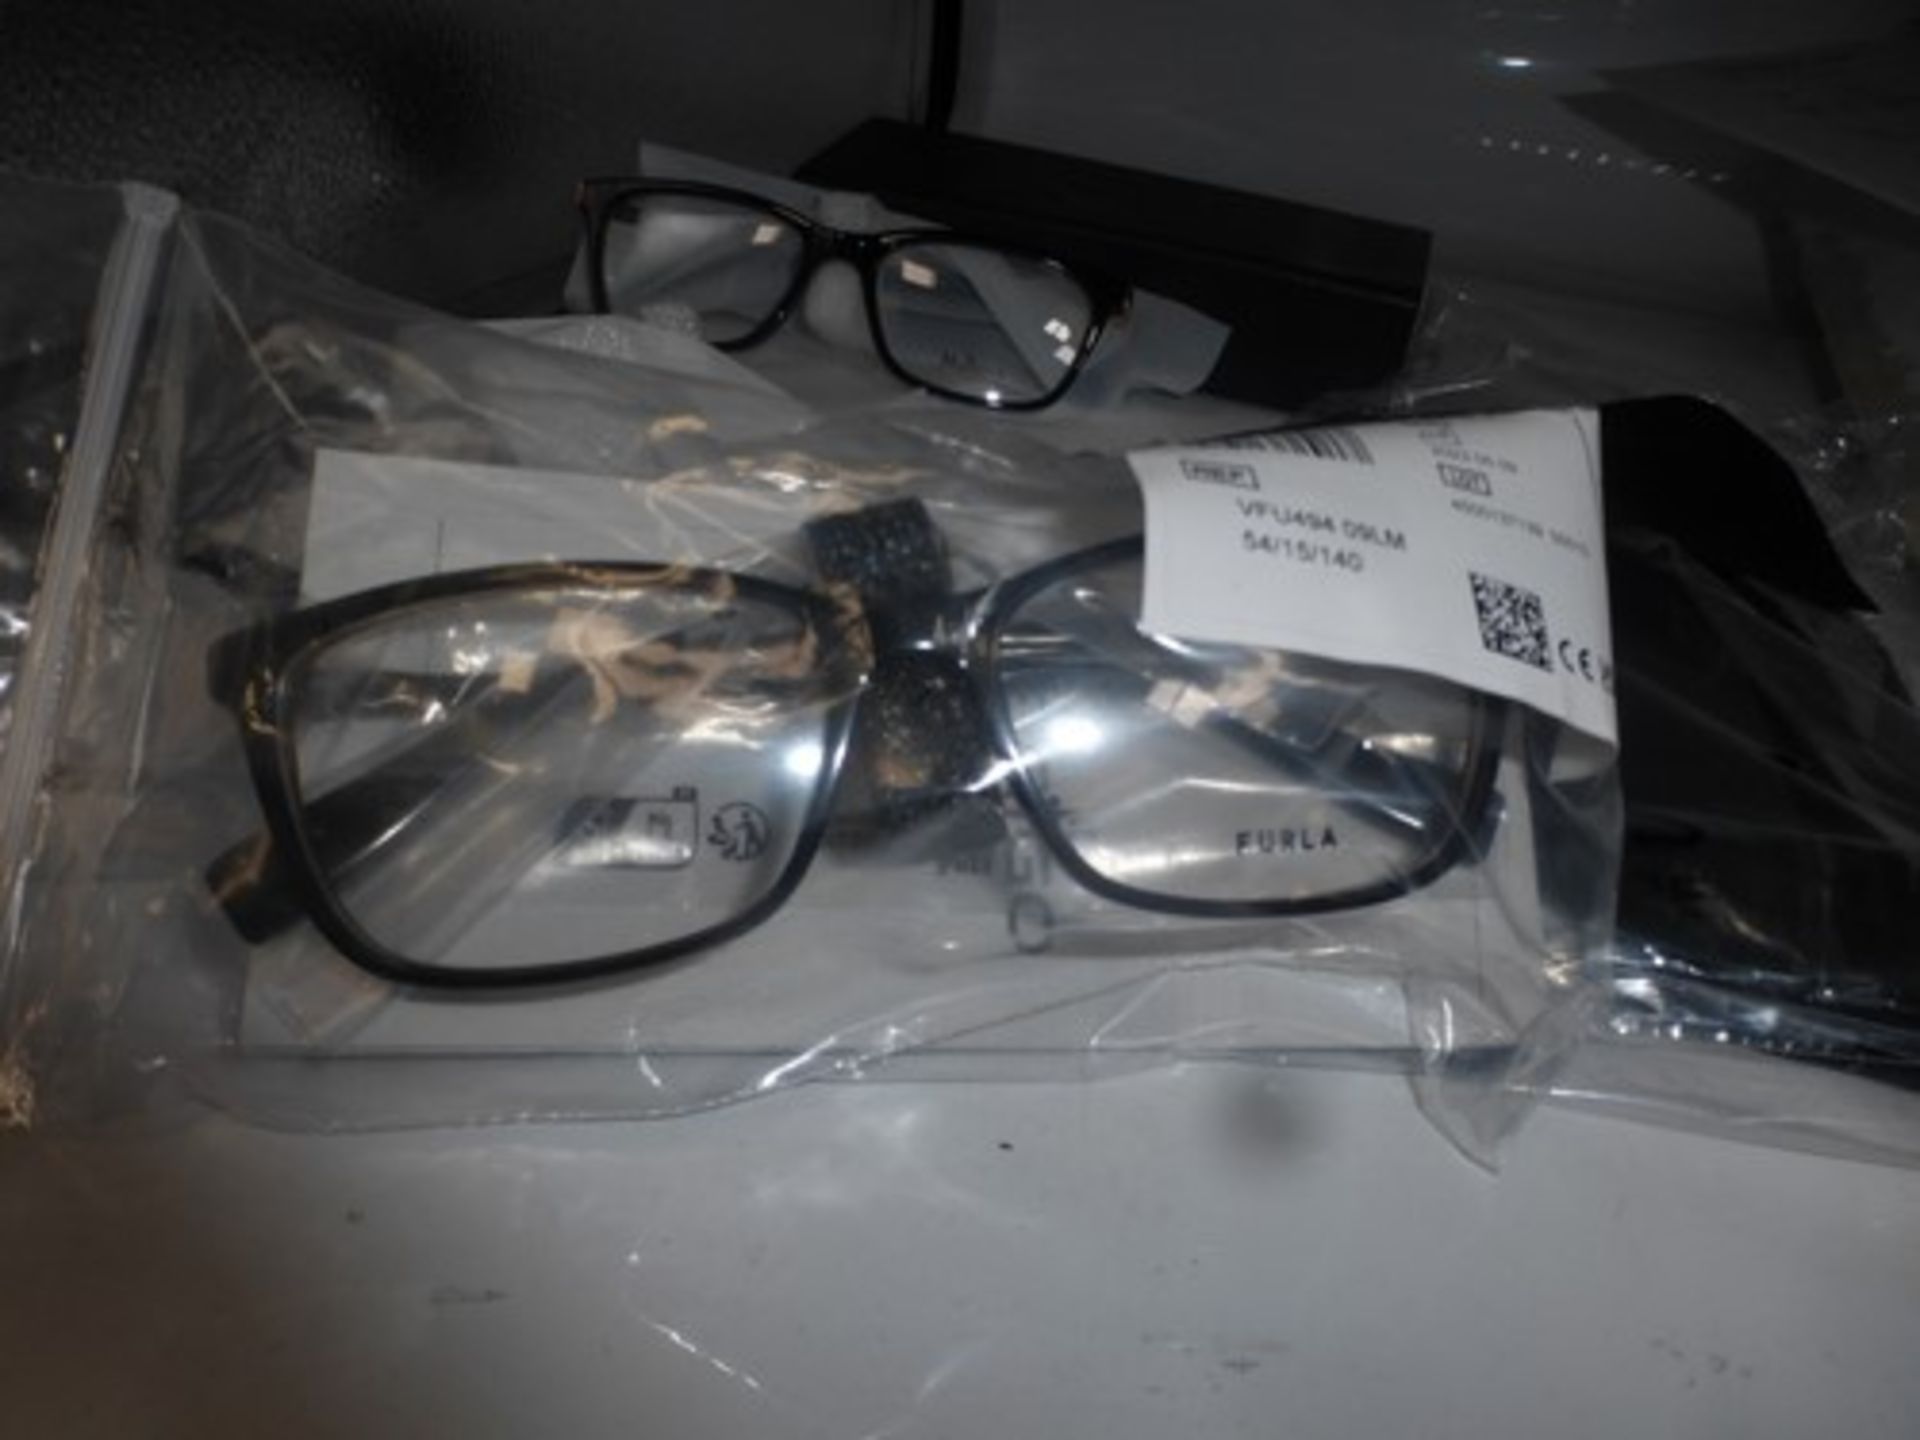 2 x pairs of Mulberry glass frames VML 101 and VML 043 with glass cases and 1 x pair of Furla - Image 2 of 4